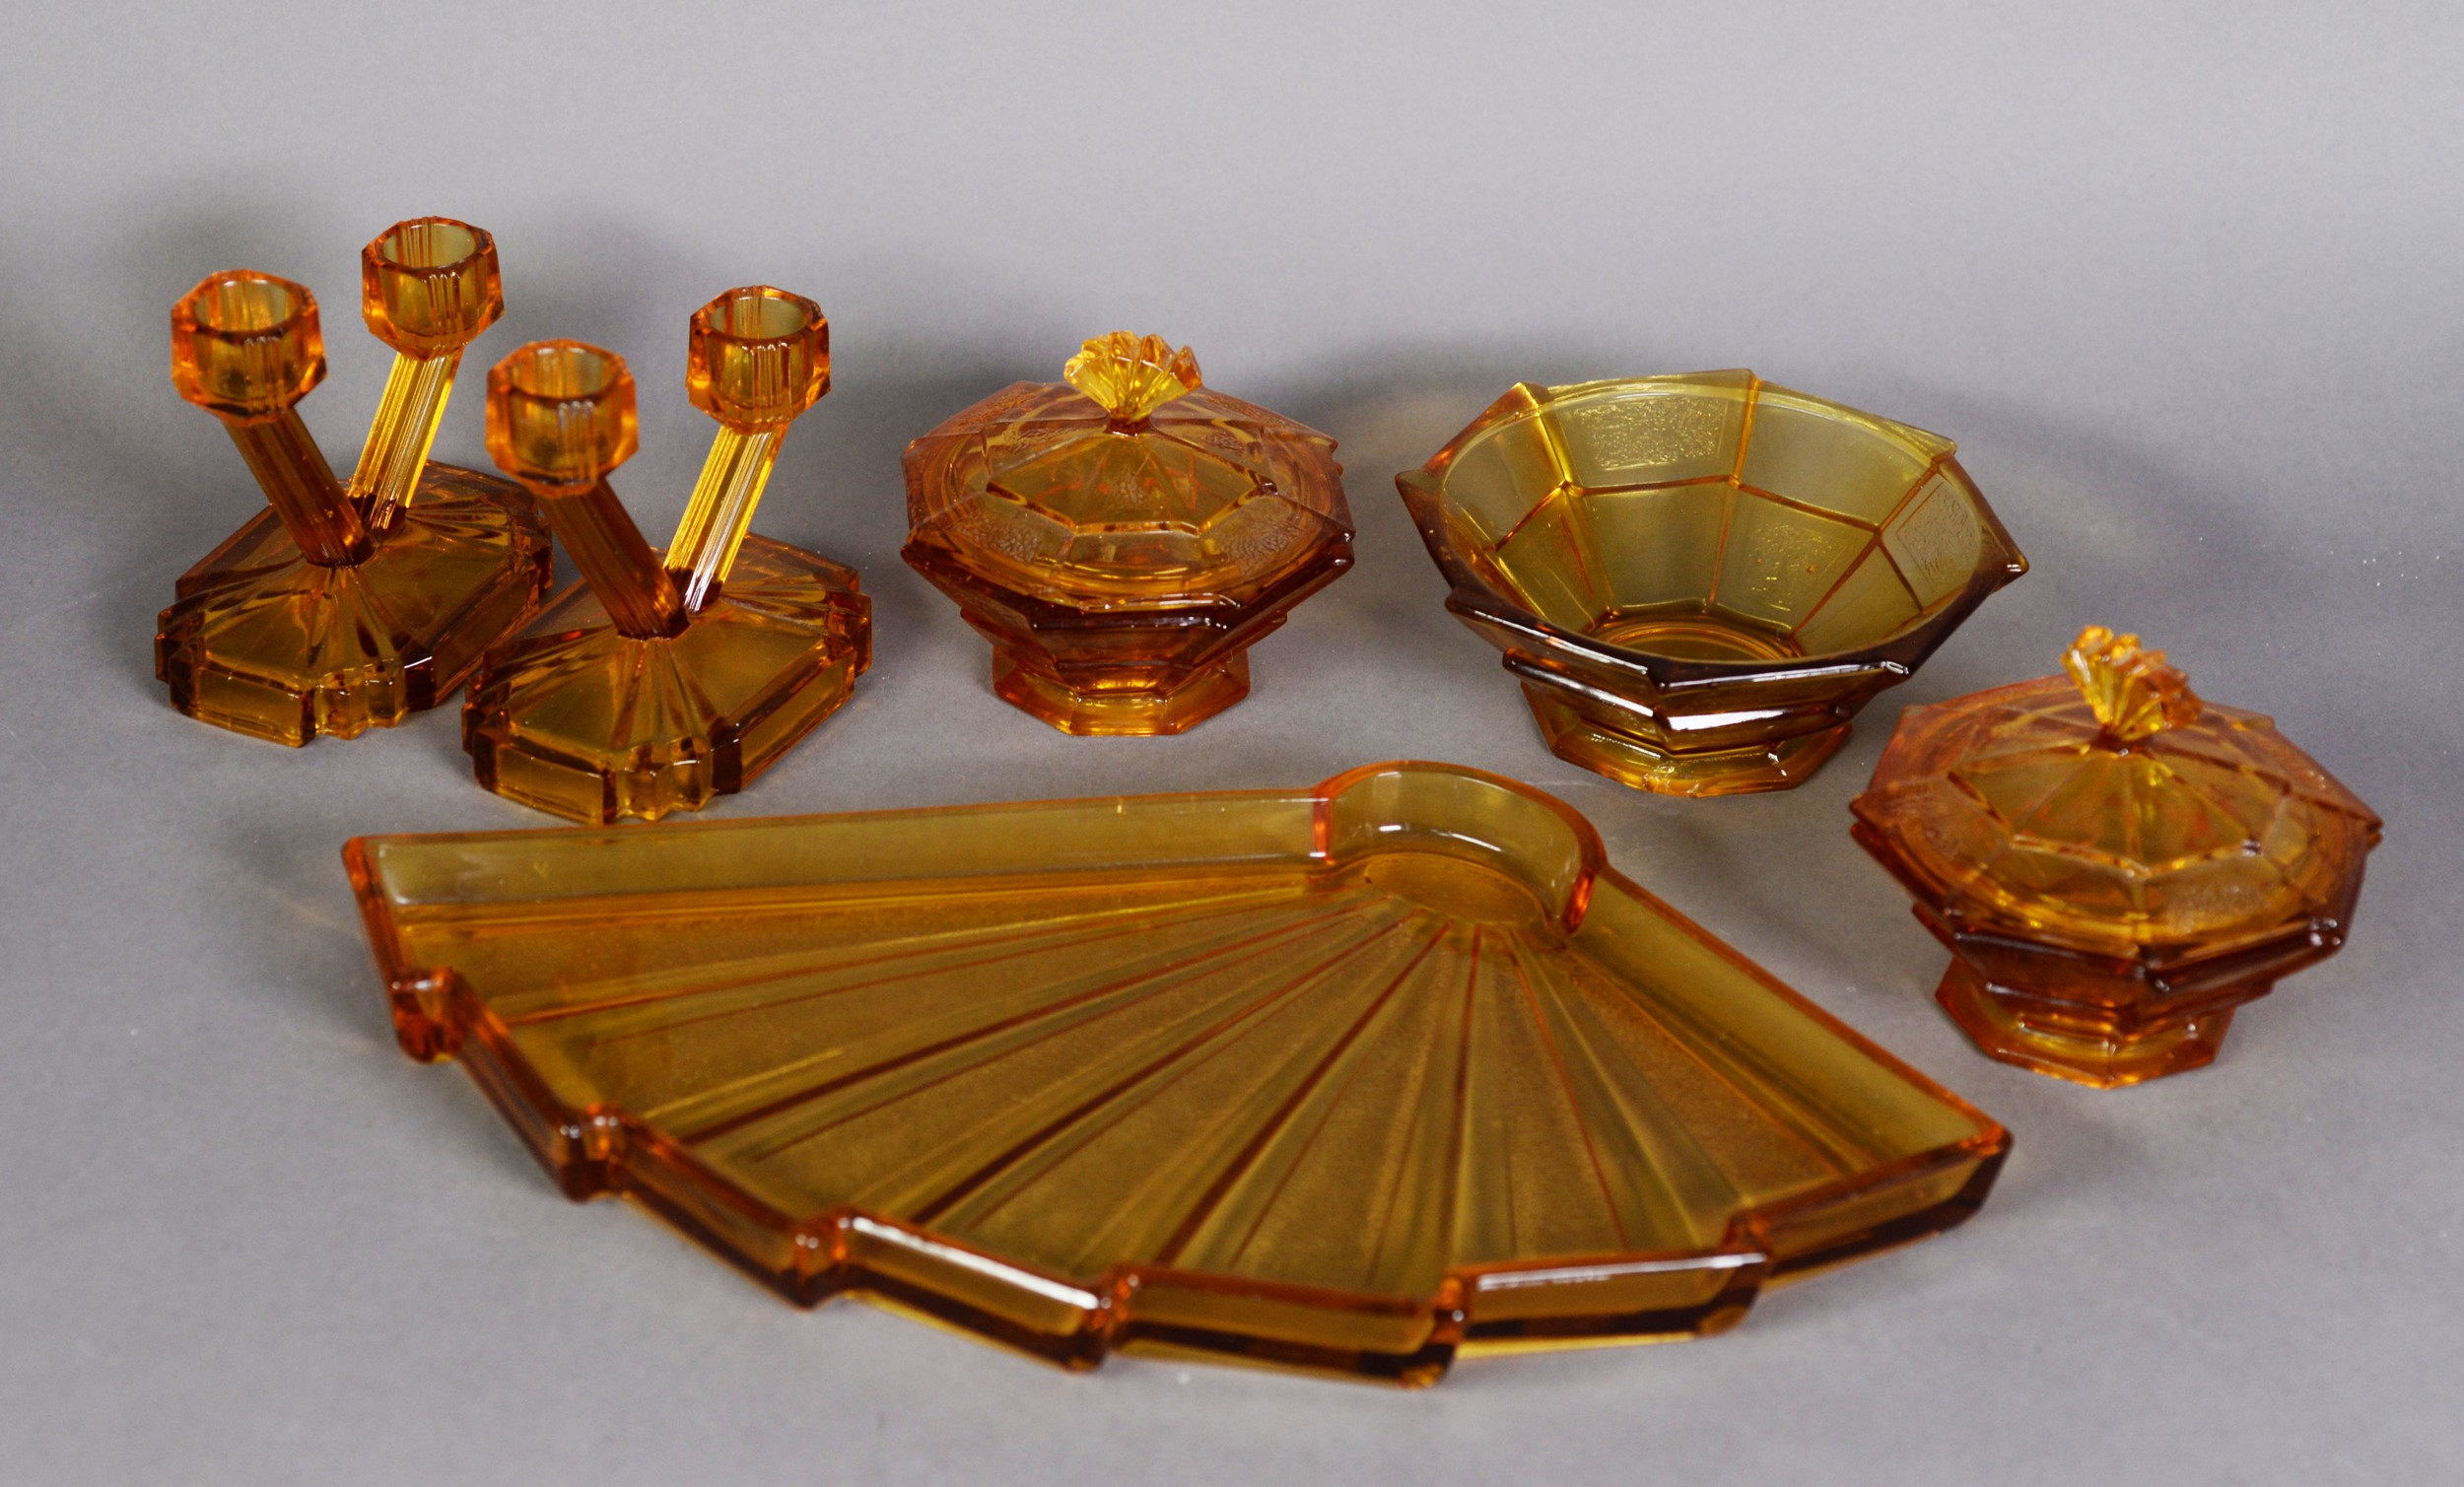 AMBER GLASS ART DECO DRESSSING TABLE SET of 6 pieces, including a fan shaped tray and a pair of